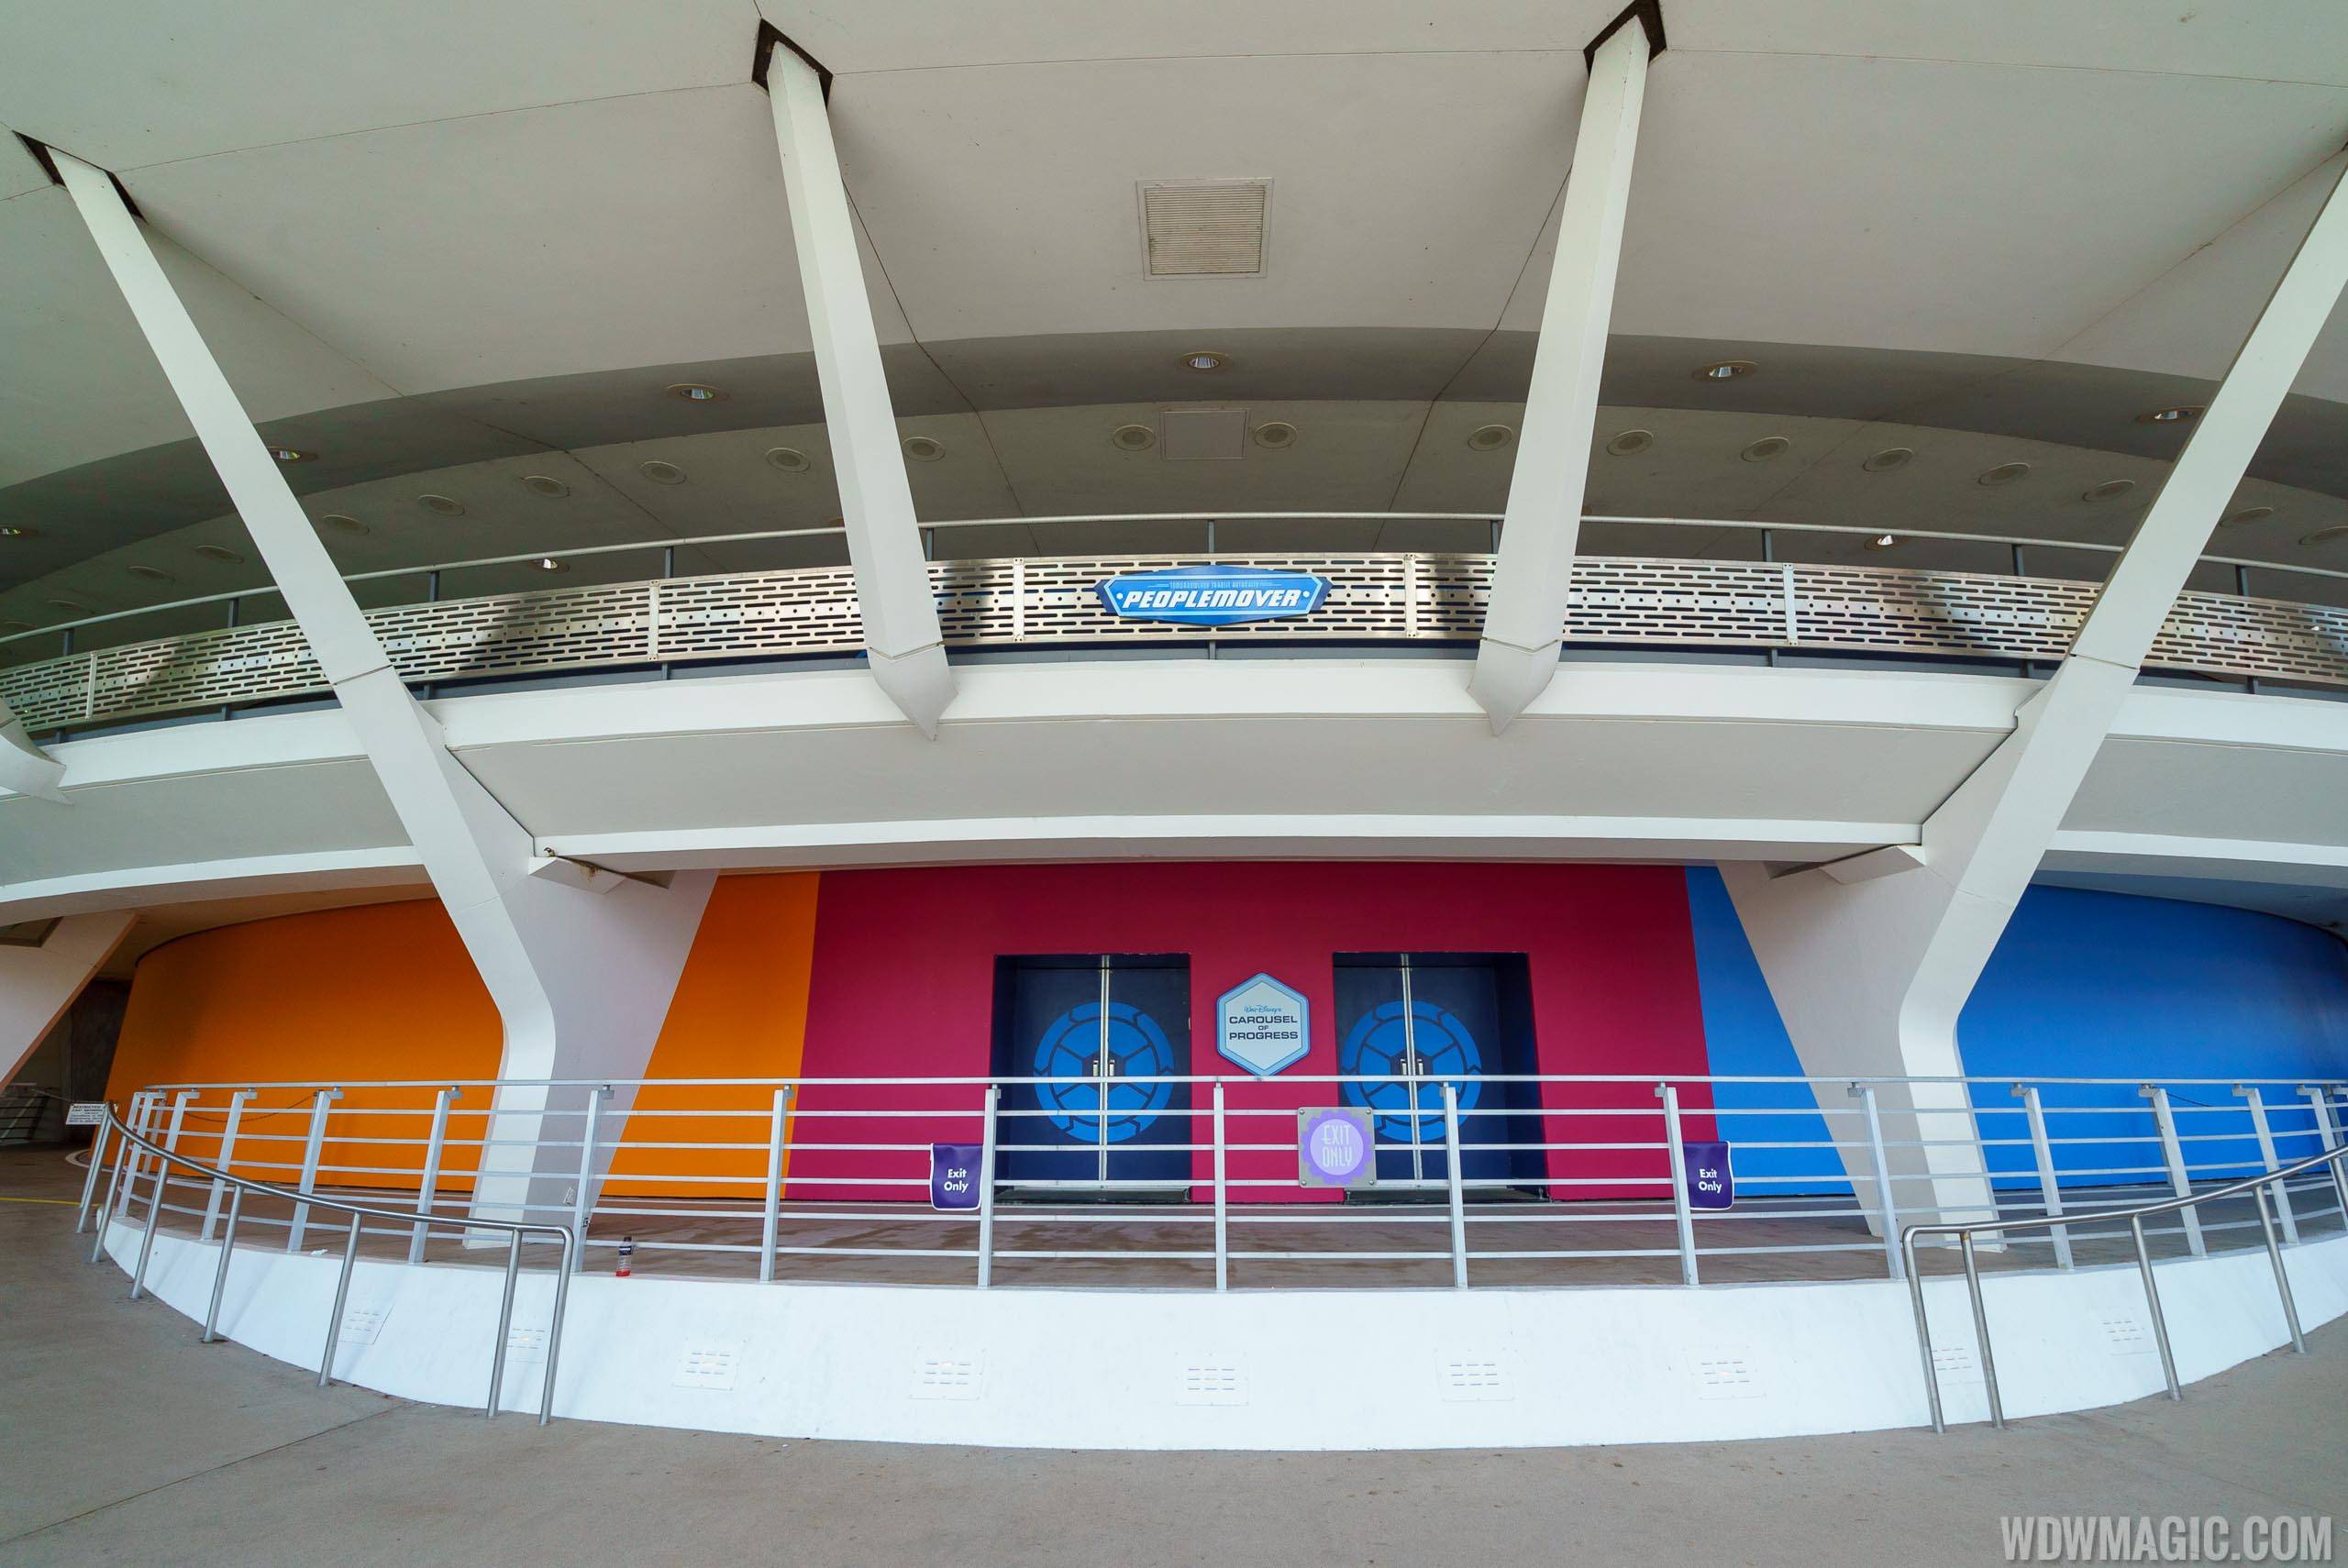 New exterior color scheme at Carousel of Progress